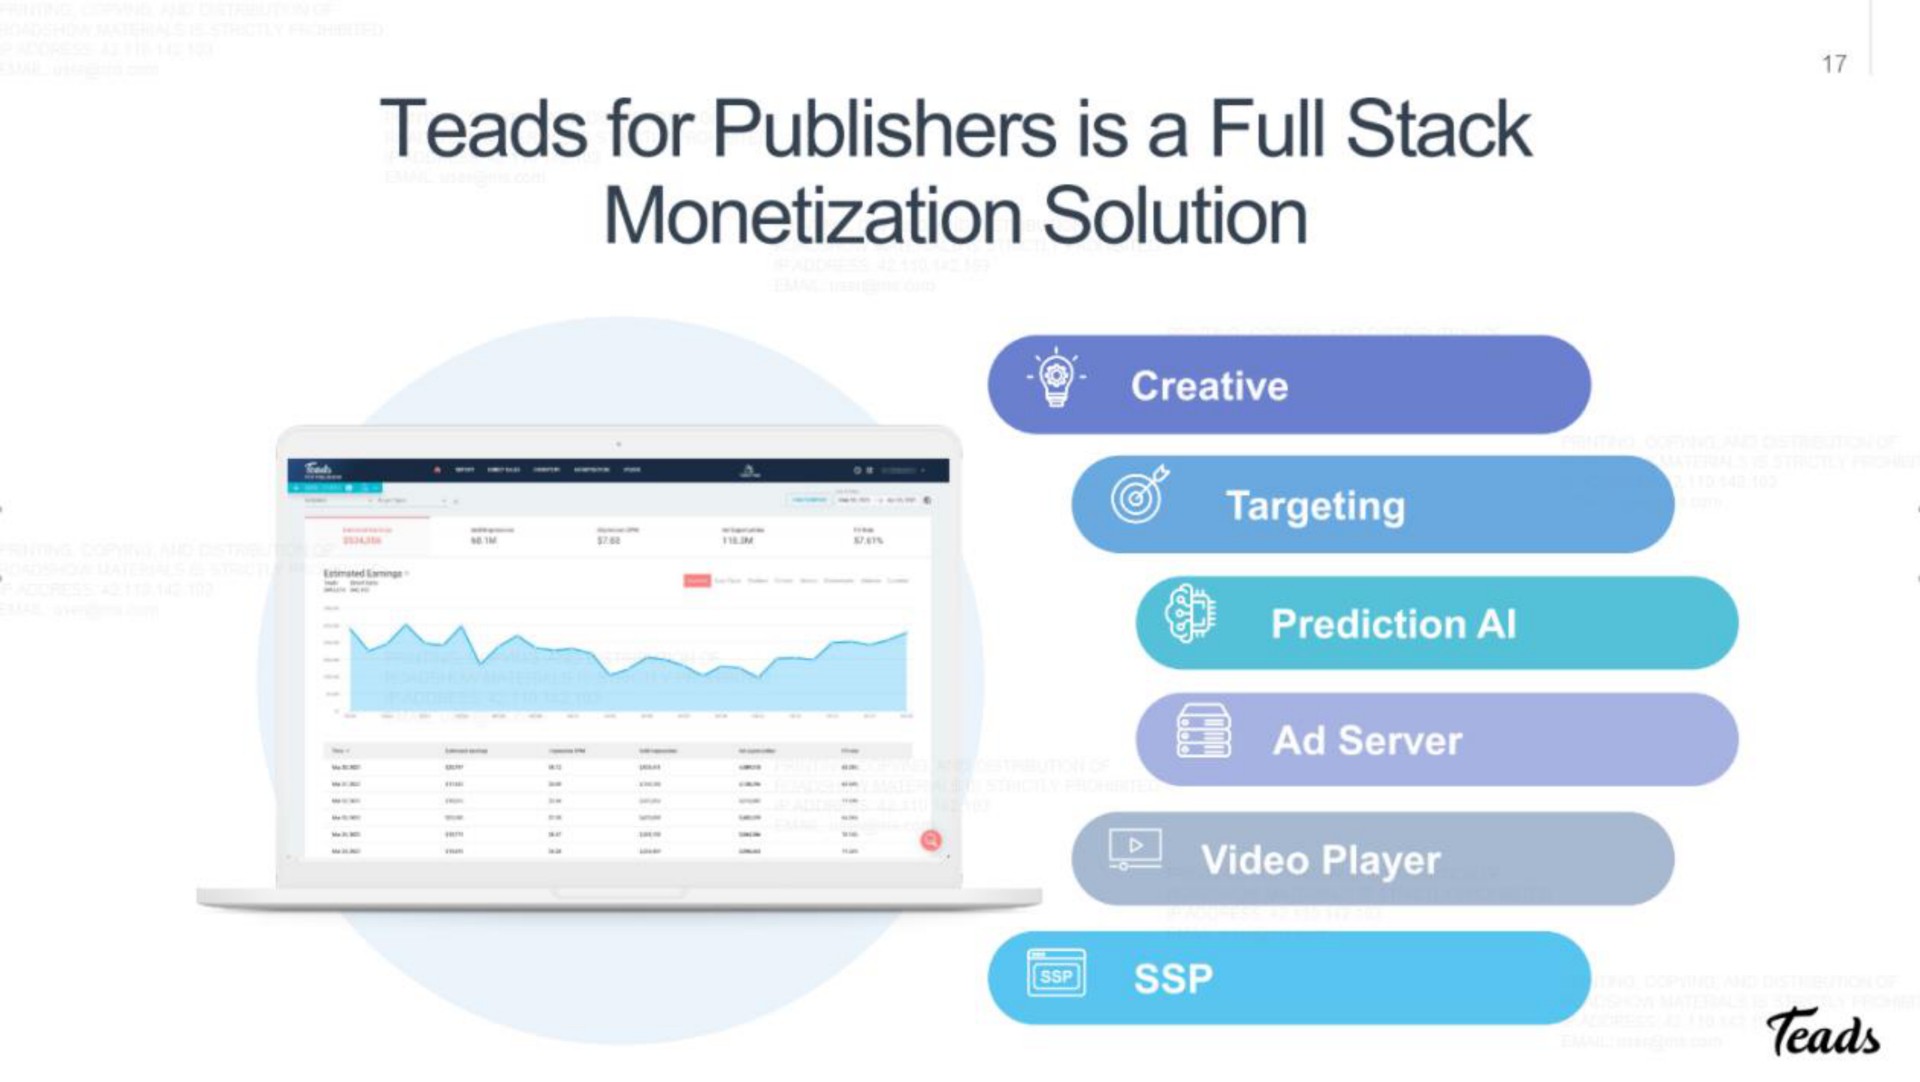 for publishers its a full stack monetization solution | Teads